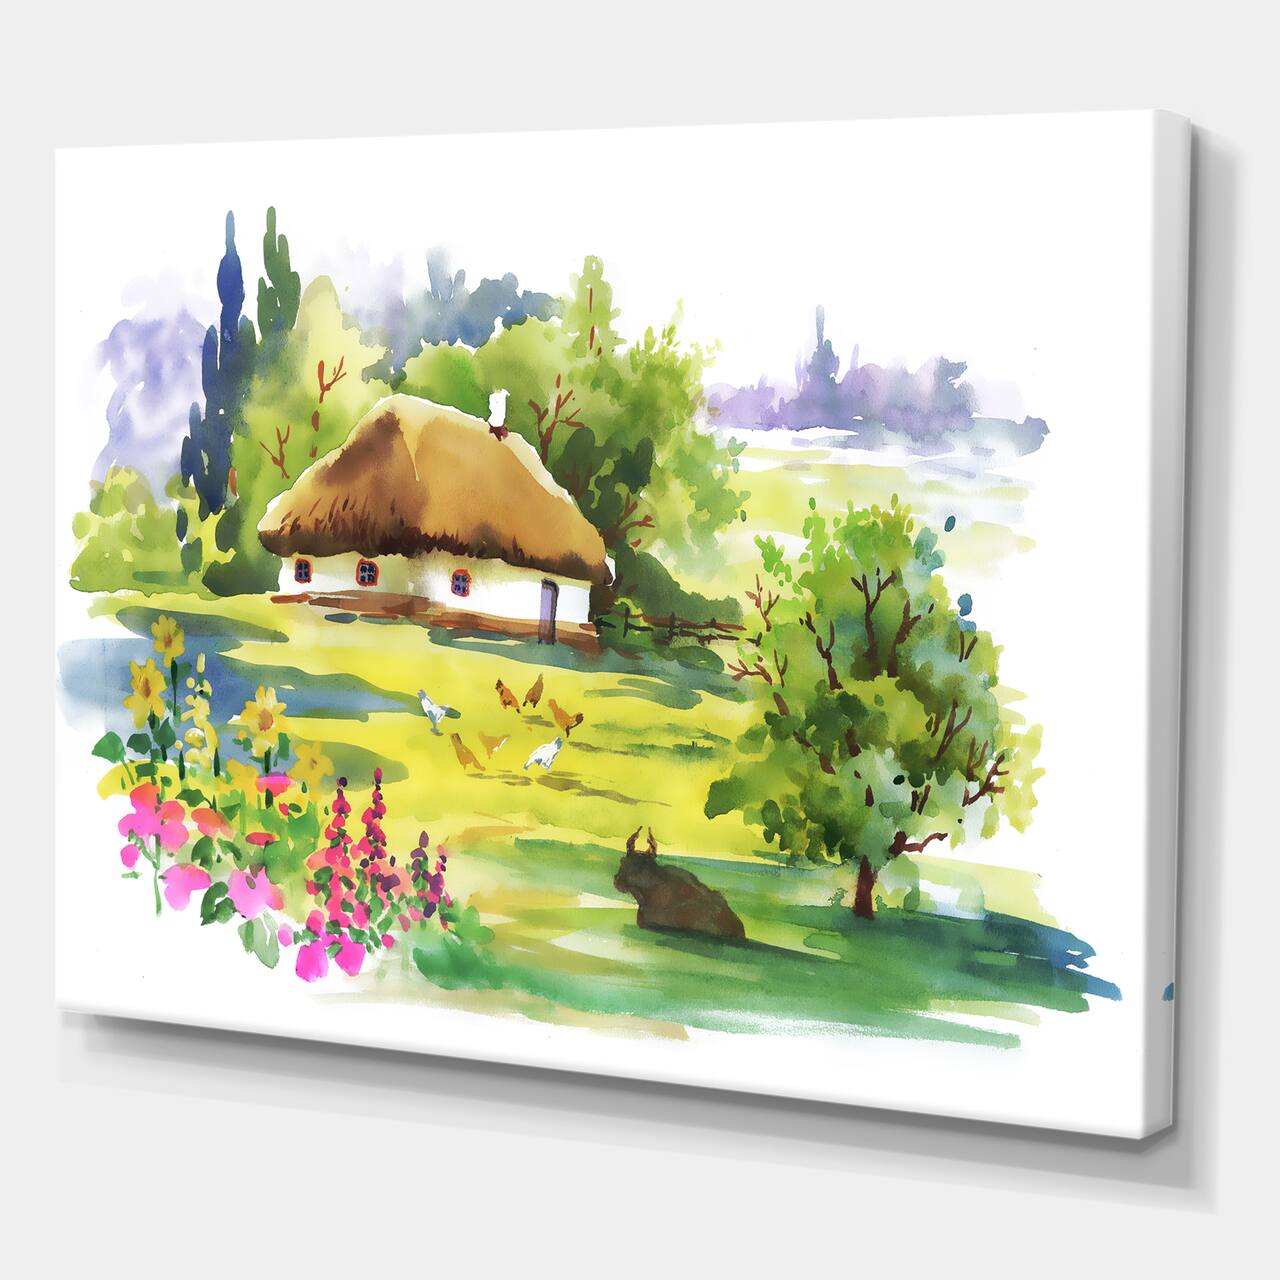 Designart - Rural House In Blossoming Greenlands - Traditional Canvas Wall Art Print